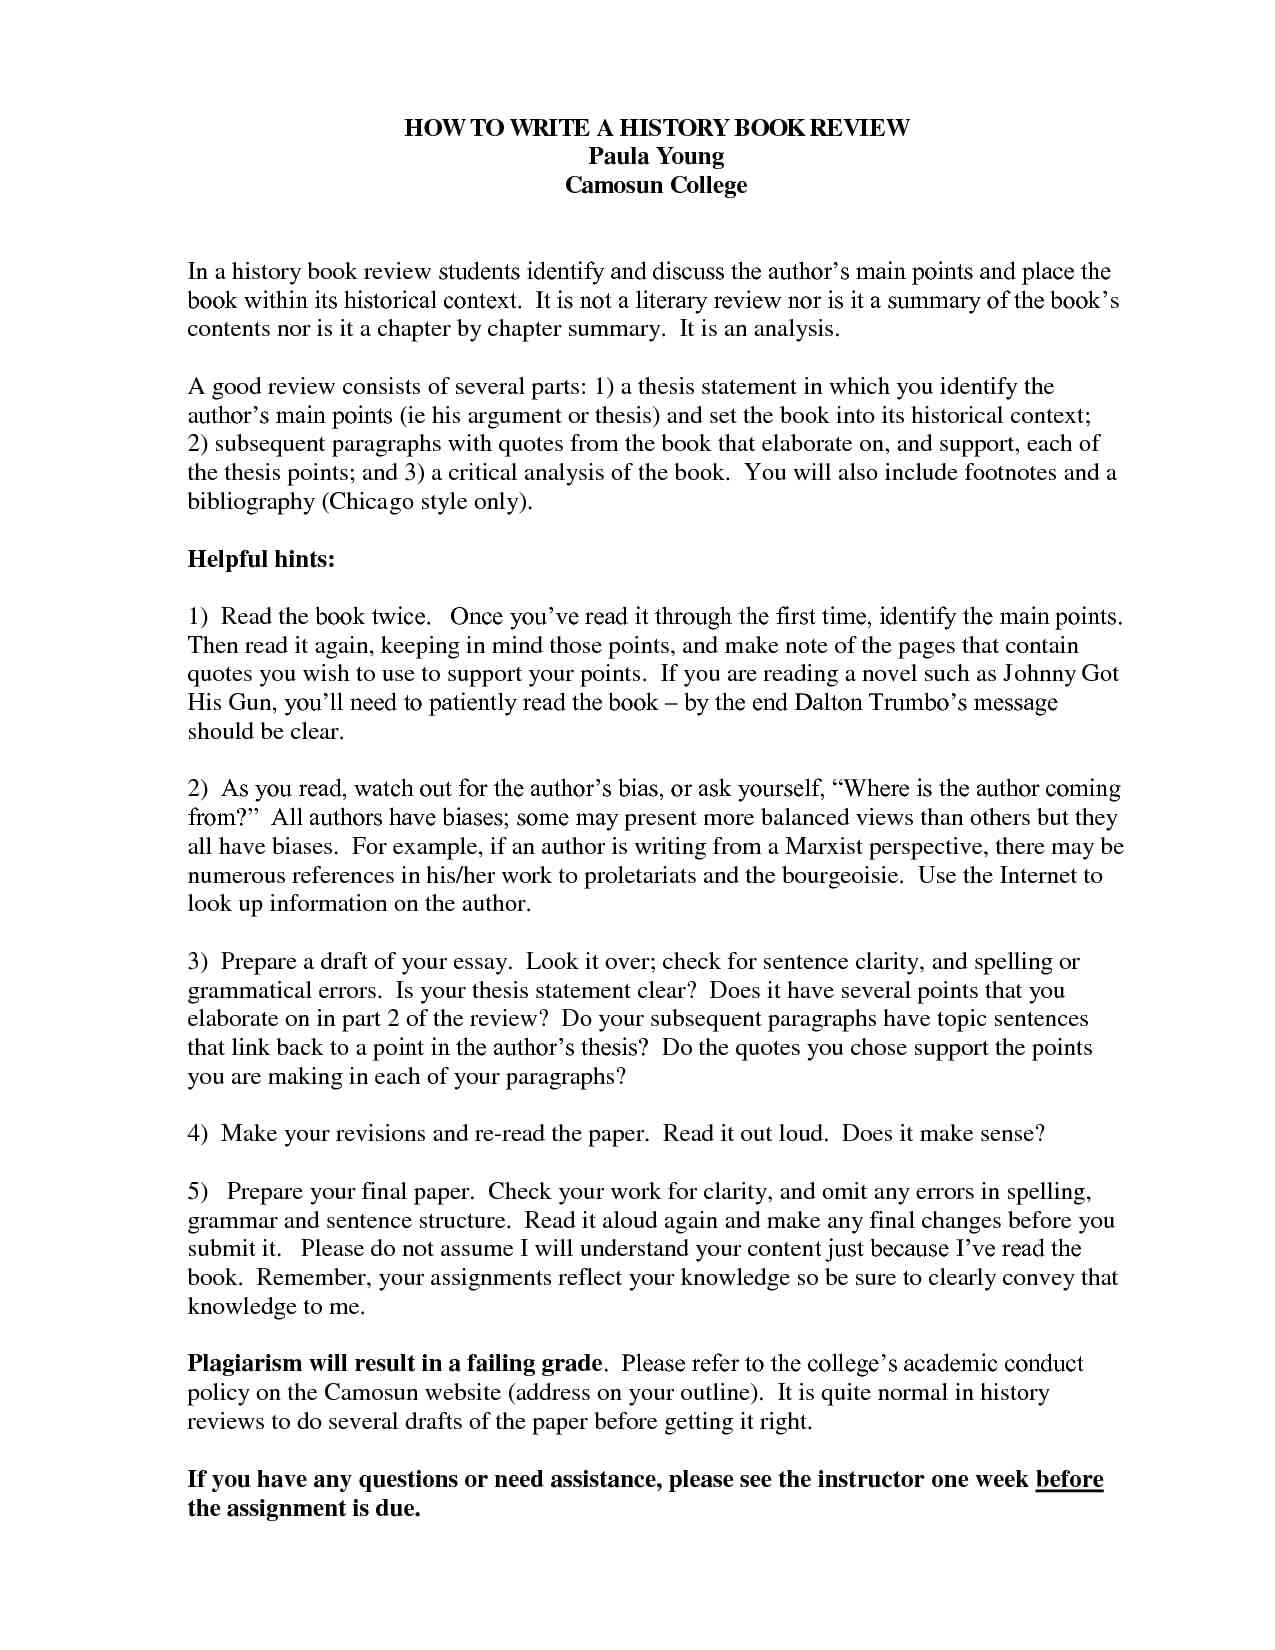 how to write a history book review essay